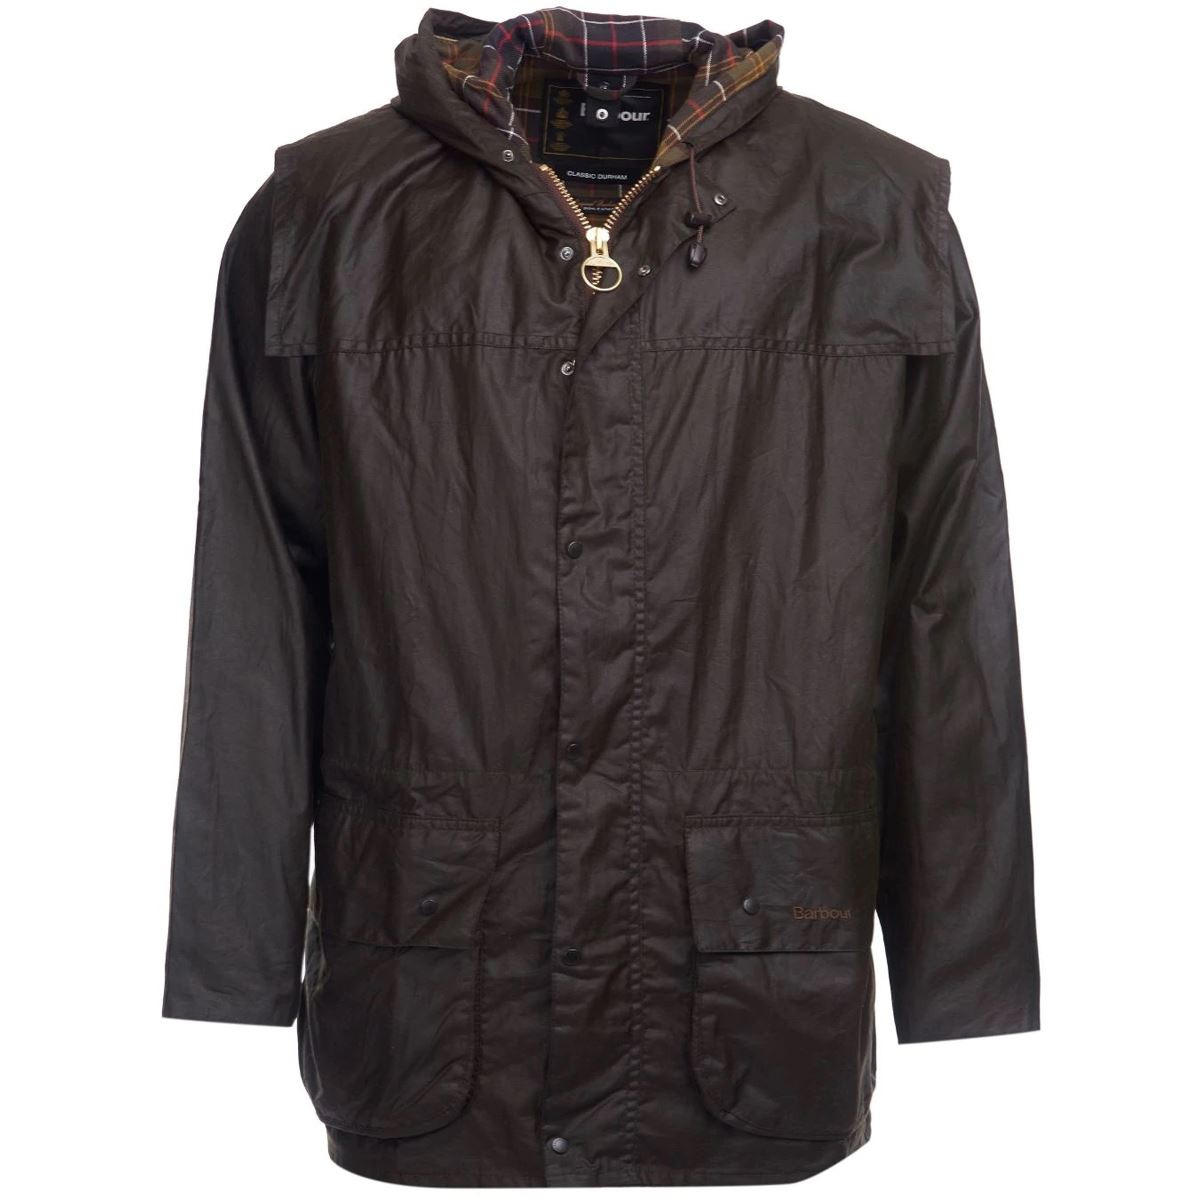 Does the Barbour Durham Jacket support extra liners?